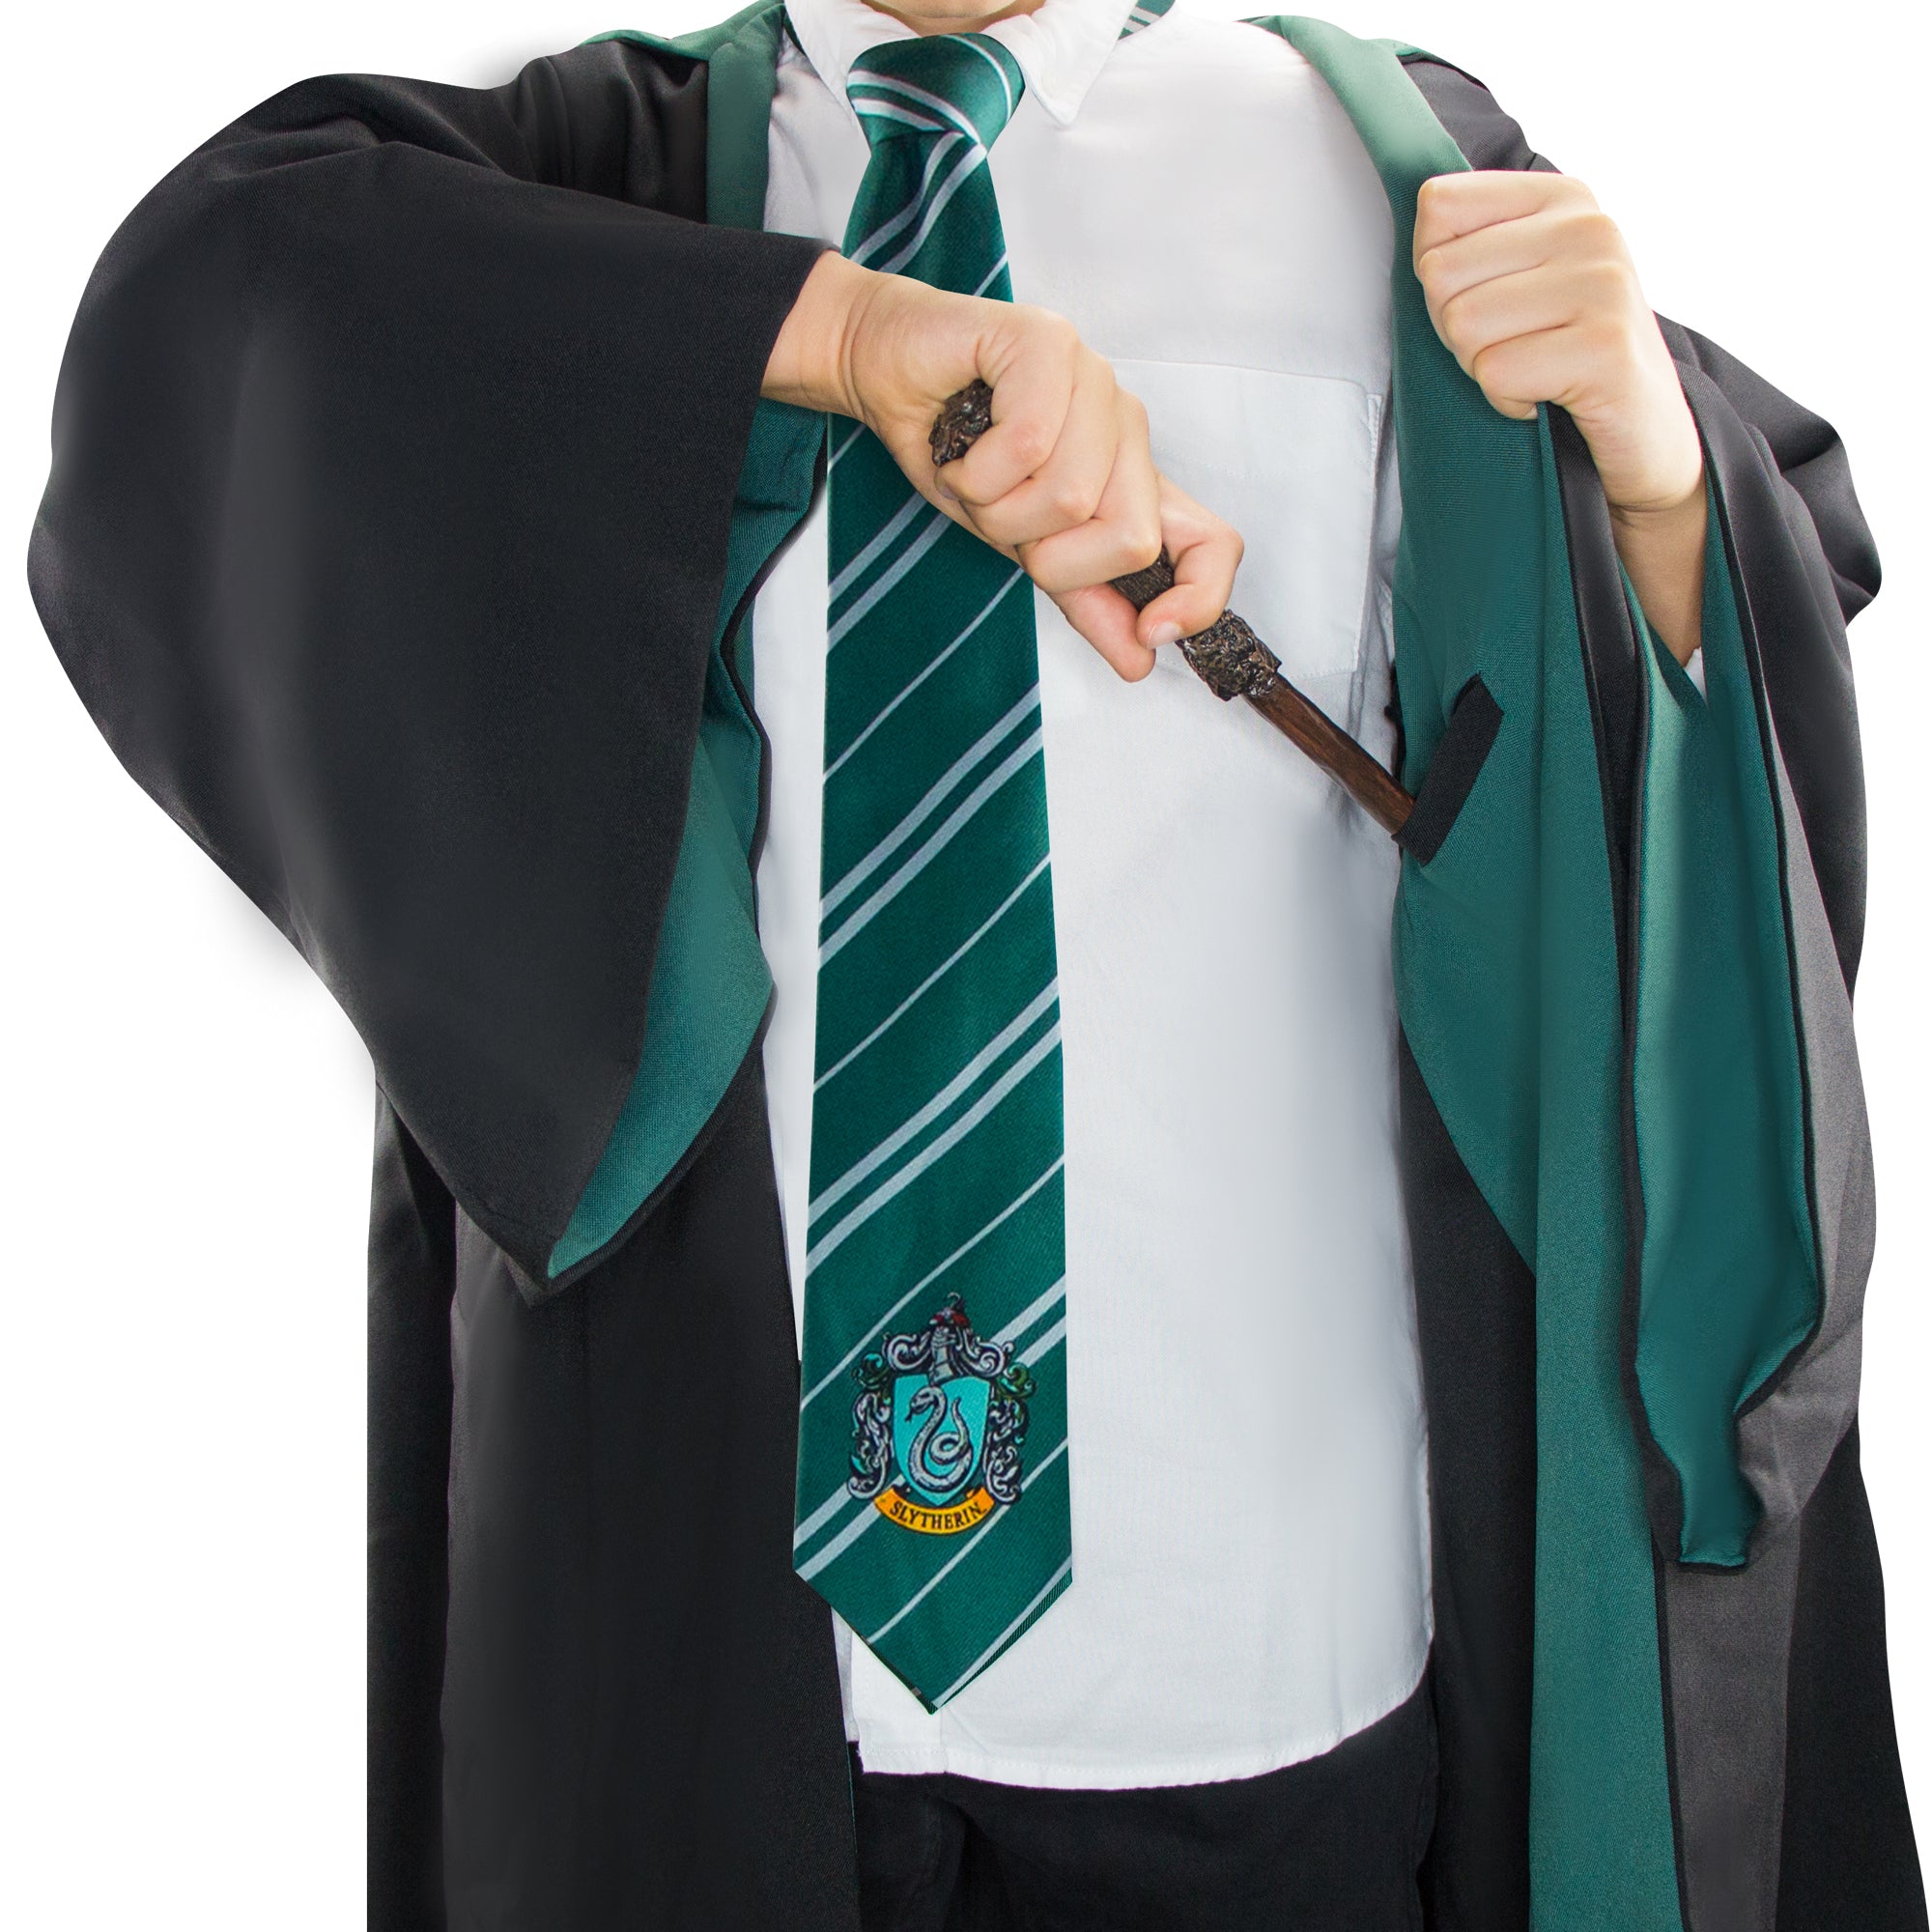 Harry Potter Slytherin Robe Deluxe Child's Costume